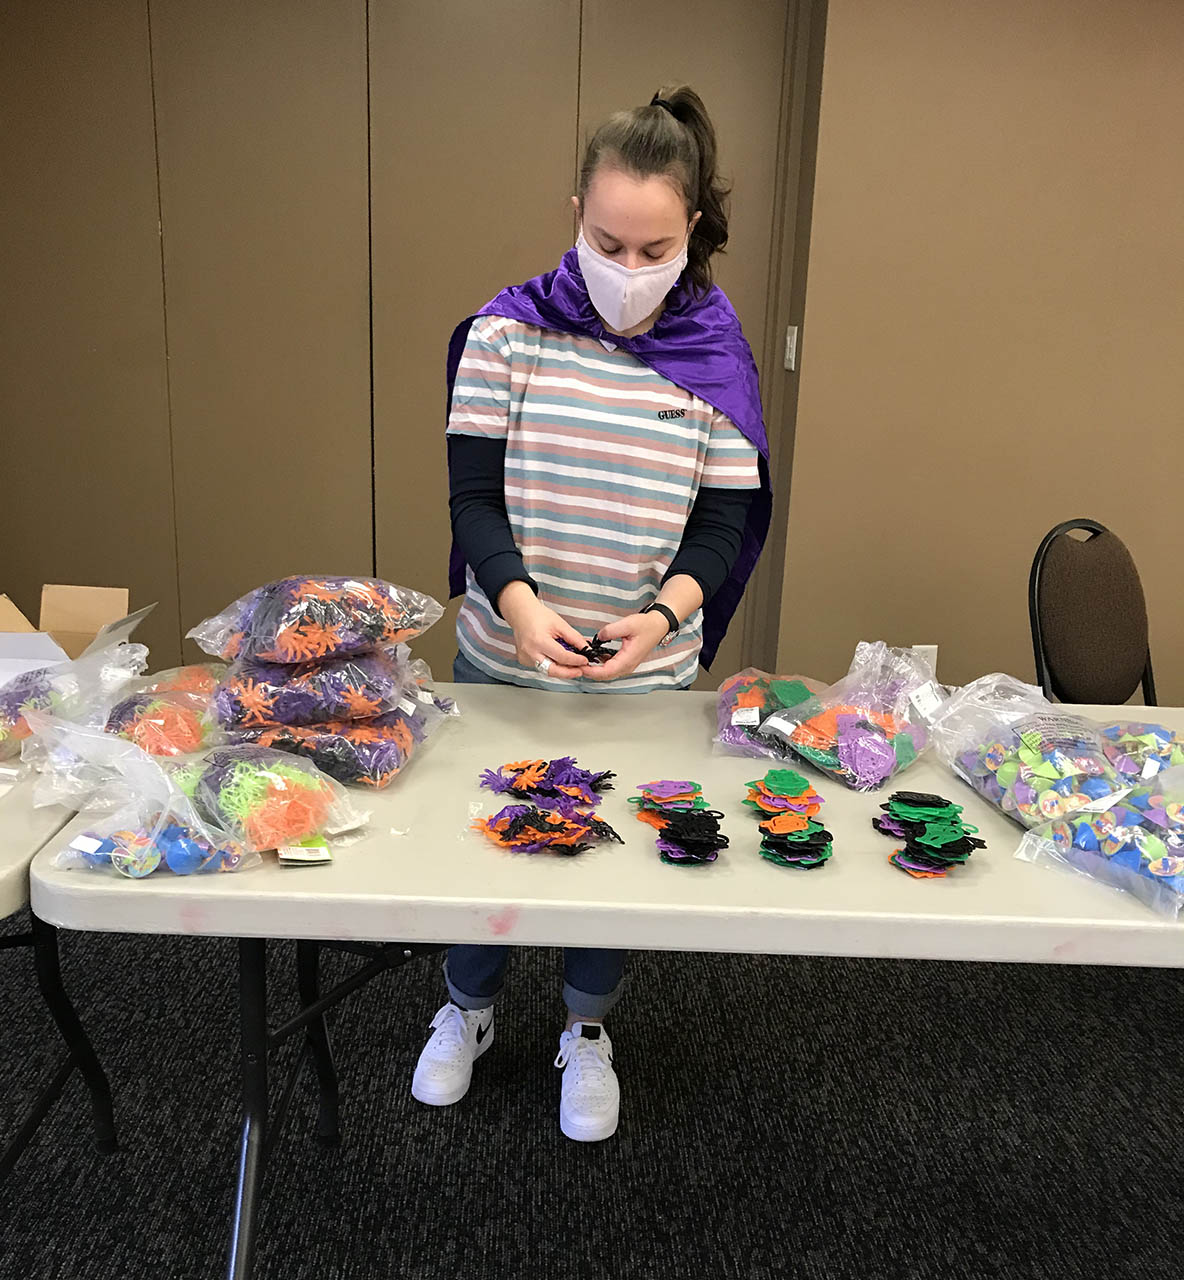 Student volunteering with making supply bags